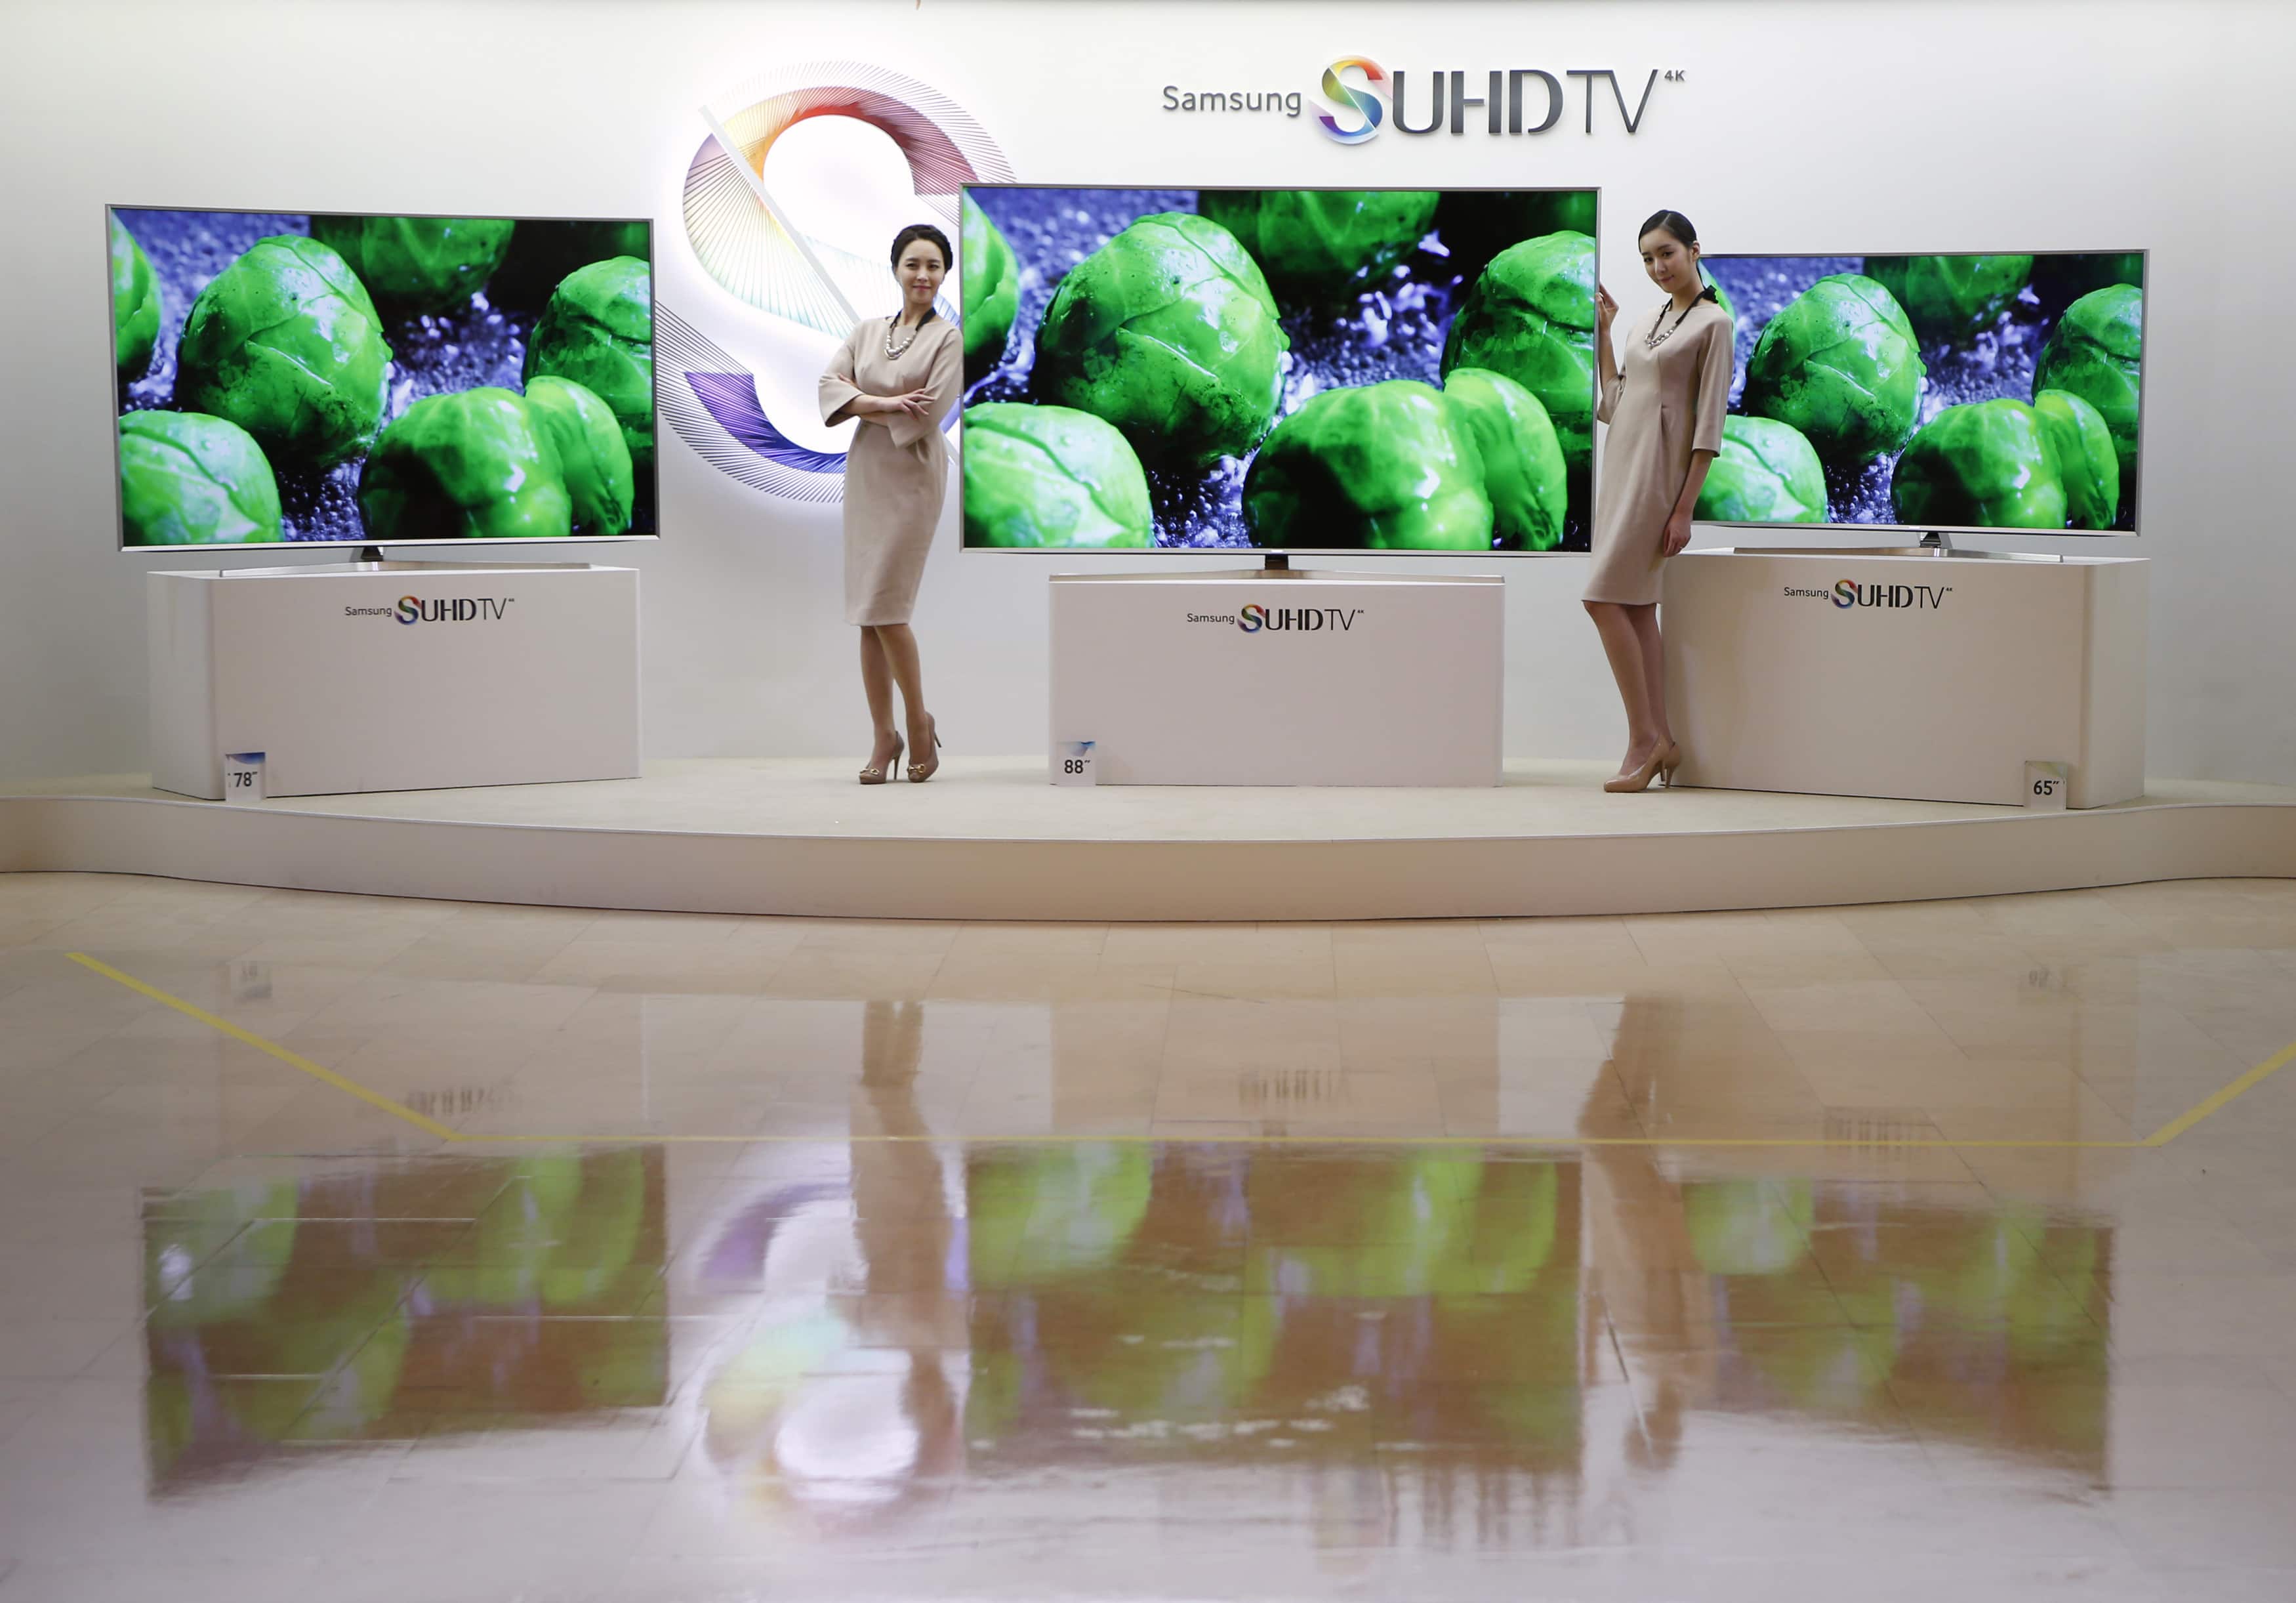 Models pose for photographs next to Samsung Electronics' S'UHD smart television sets during its launch event in Seoul, 5 February 2015, REUTERS/Kim Hong-Ji